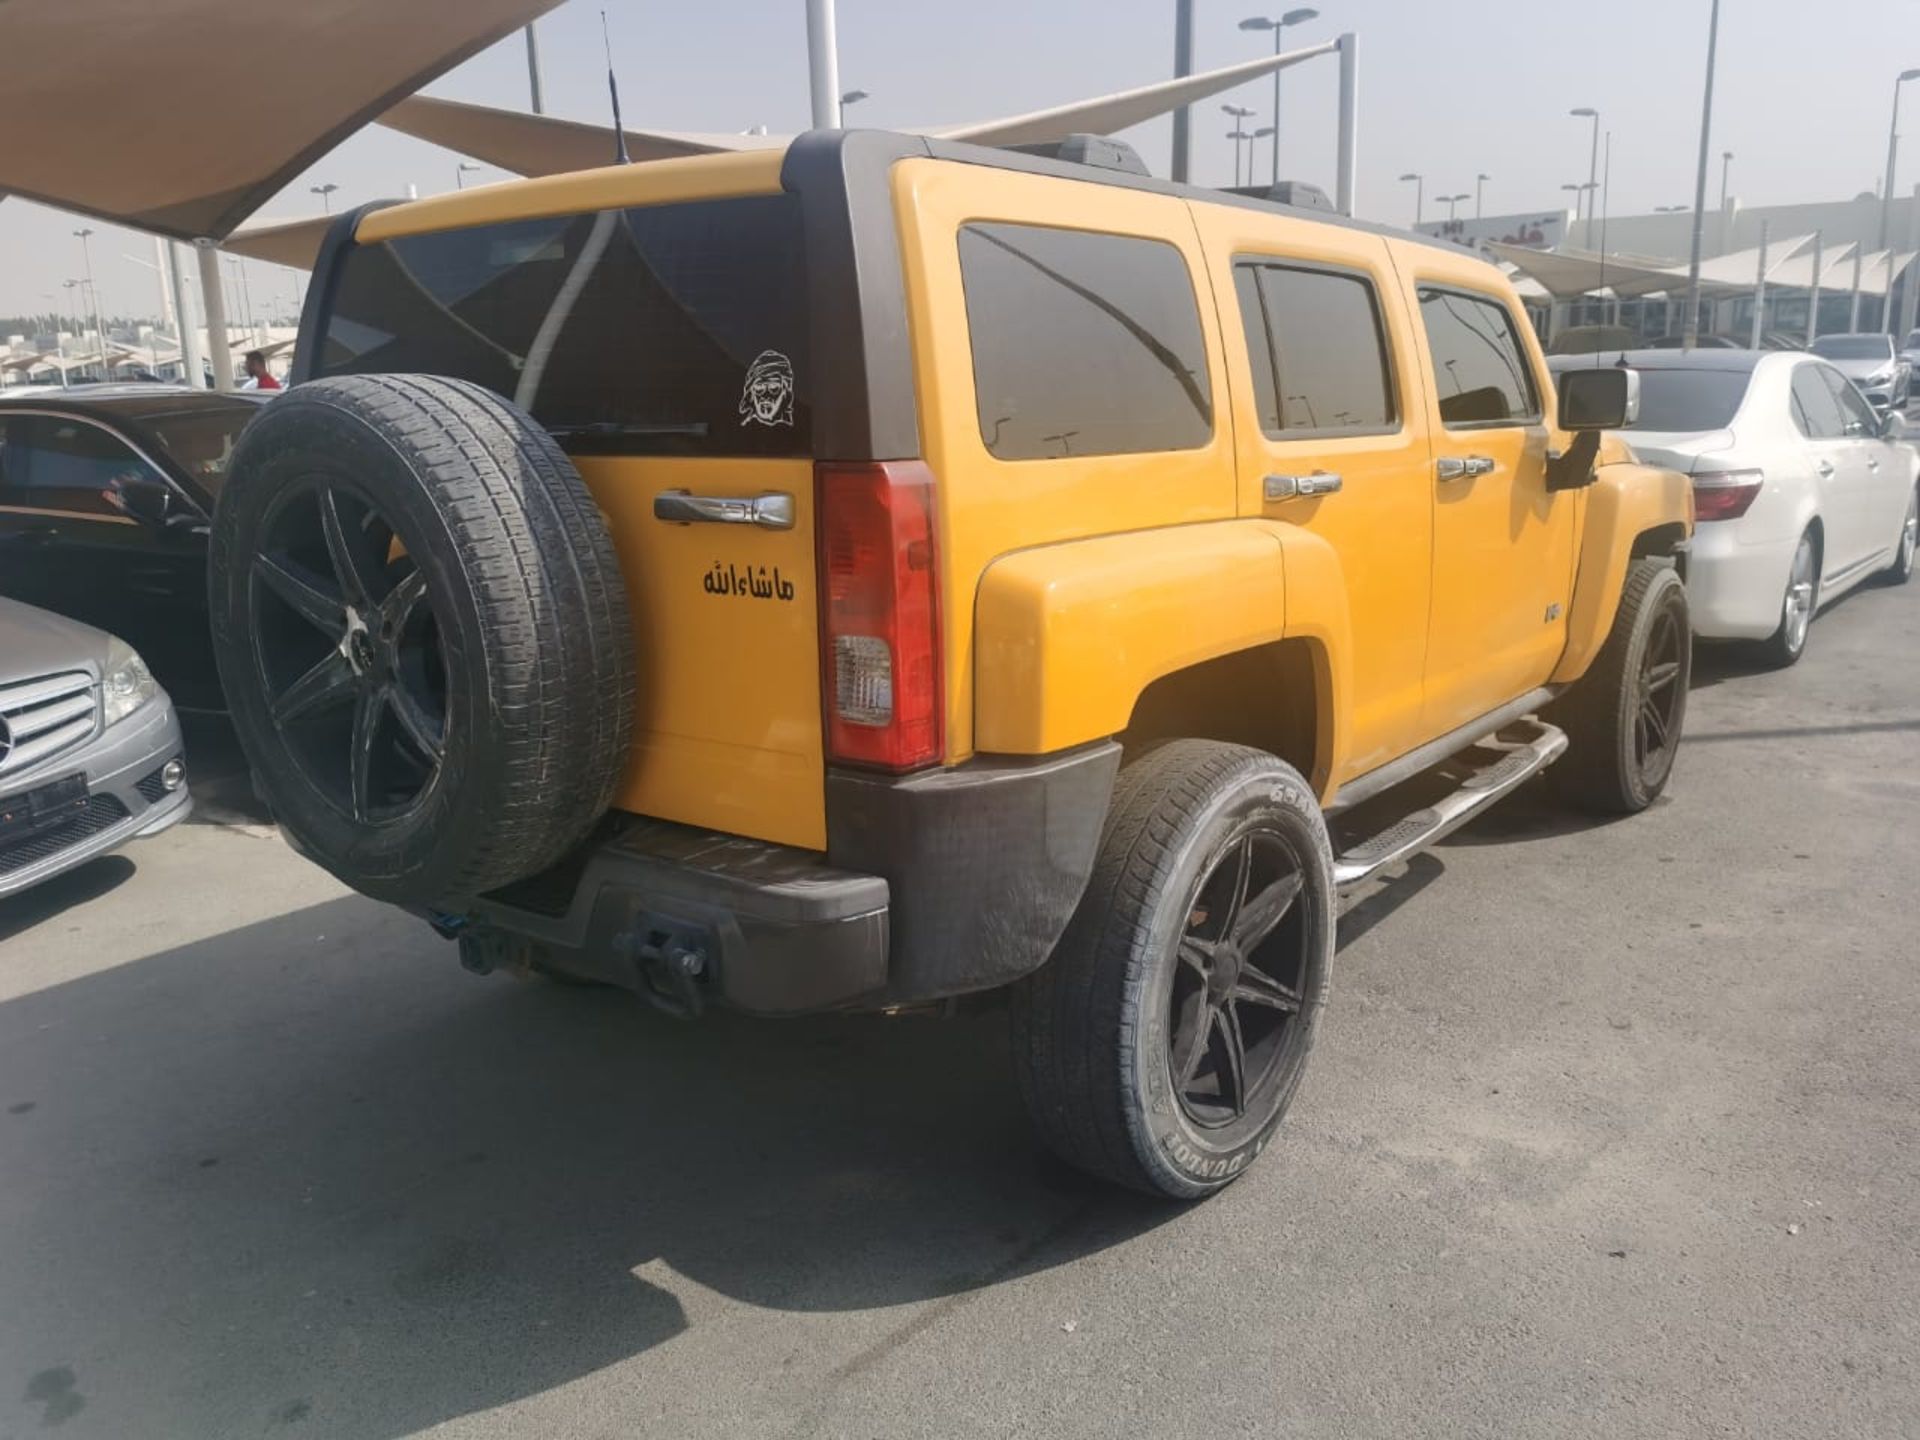 HUMMER H3 90,000 KM YELLOW WITH BLACK, UPGRADED WHEELS AND SUSPENSION, IN UK MID FEB, YEAR 2006 - Image 3 of 4